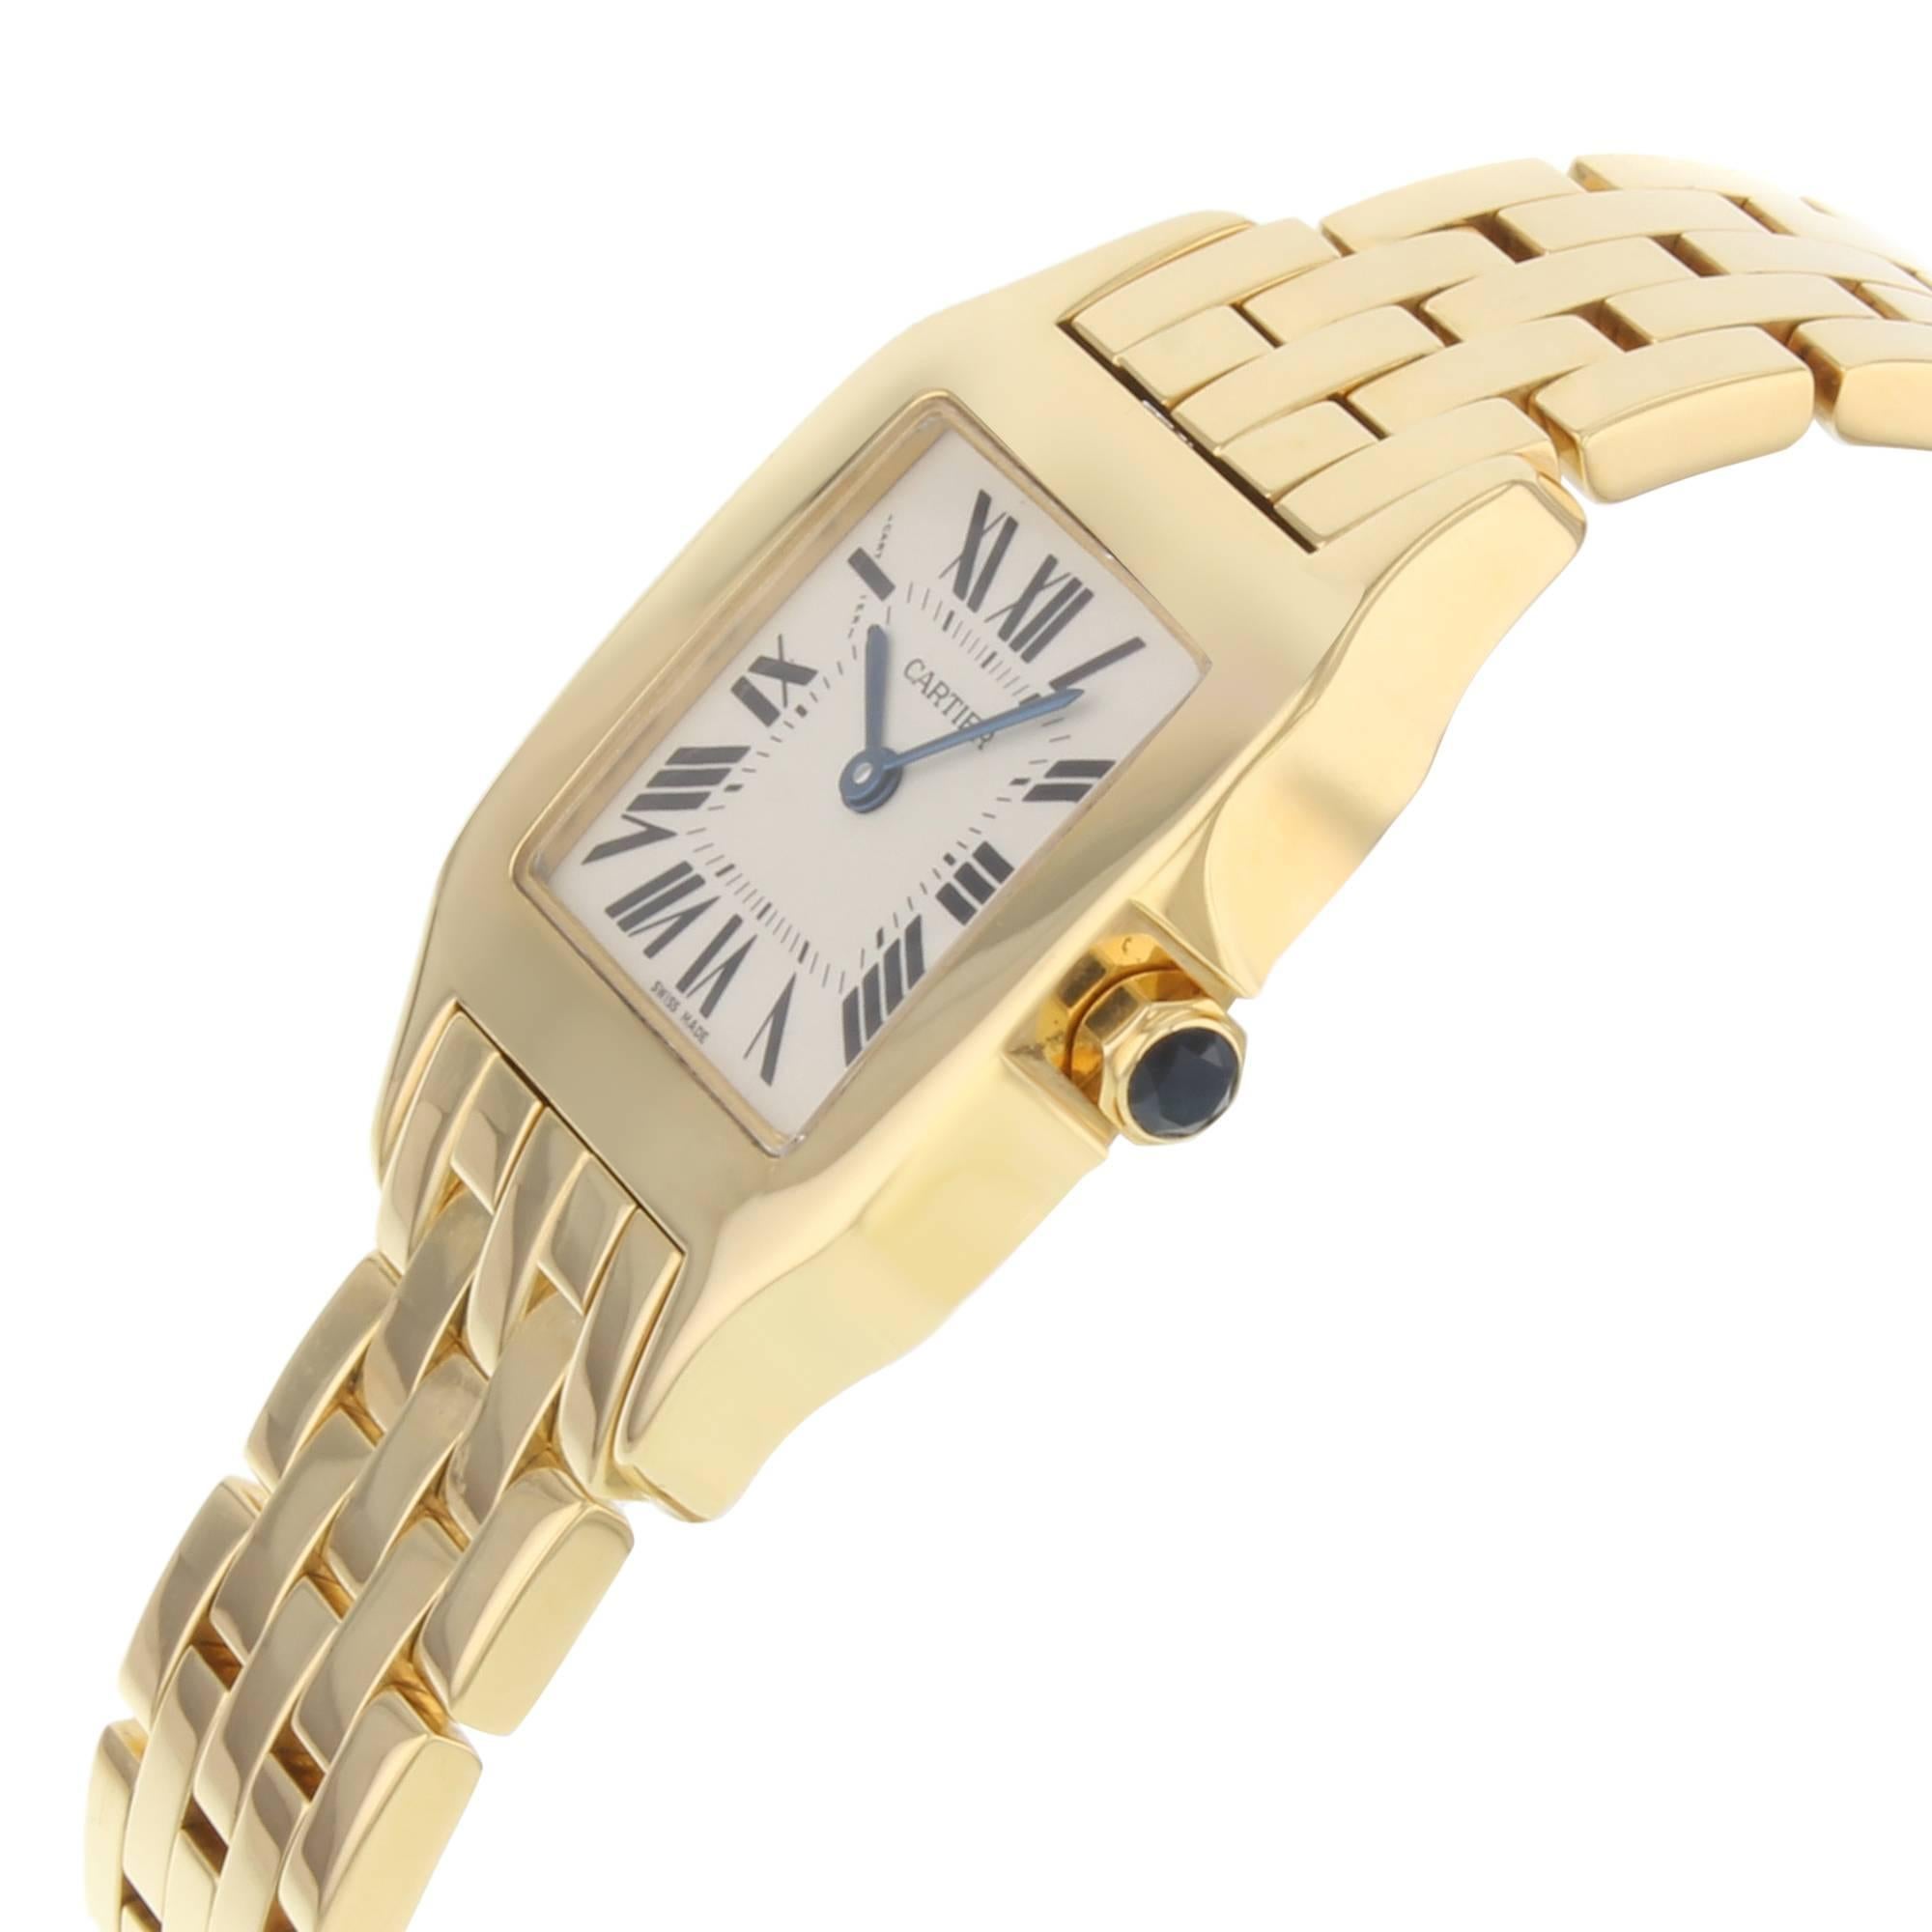 This  never been worn  Cartier Santos W25062X9  is a beautiful Womens timepiece that is powered by a quartz movement which is cased in a yellow gold case. It has a square shape face,  dial and has hand roman numerals style markers. It is completed